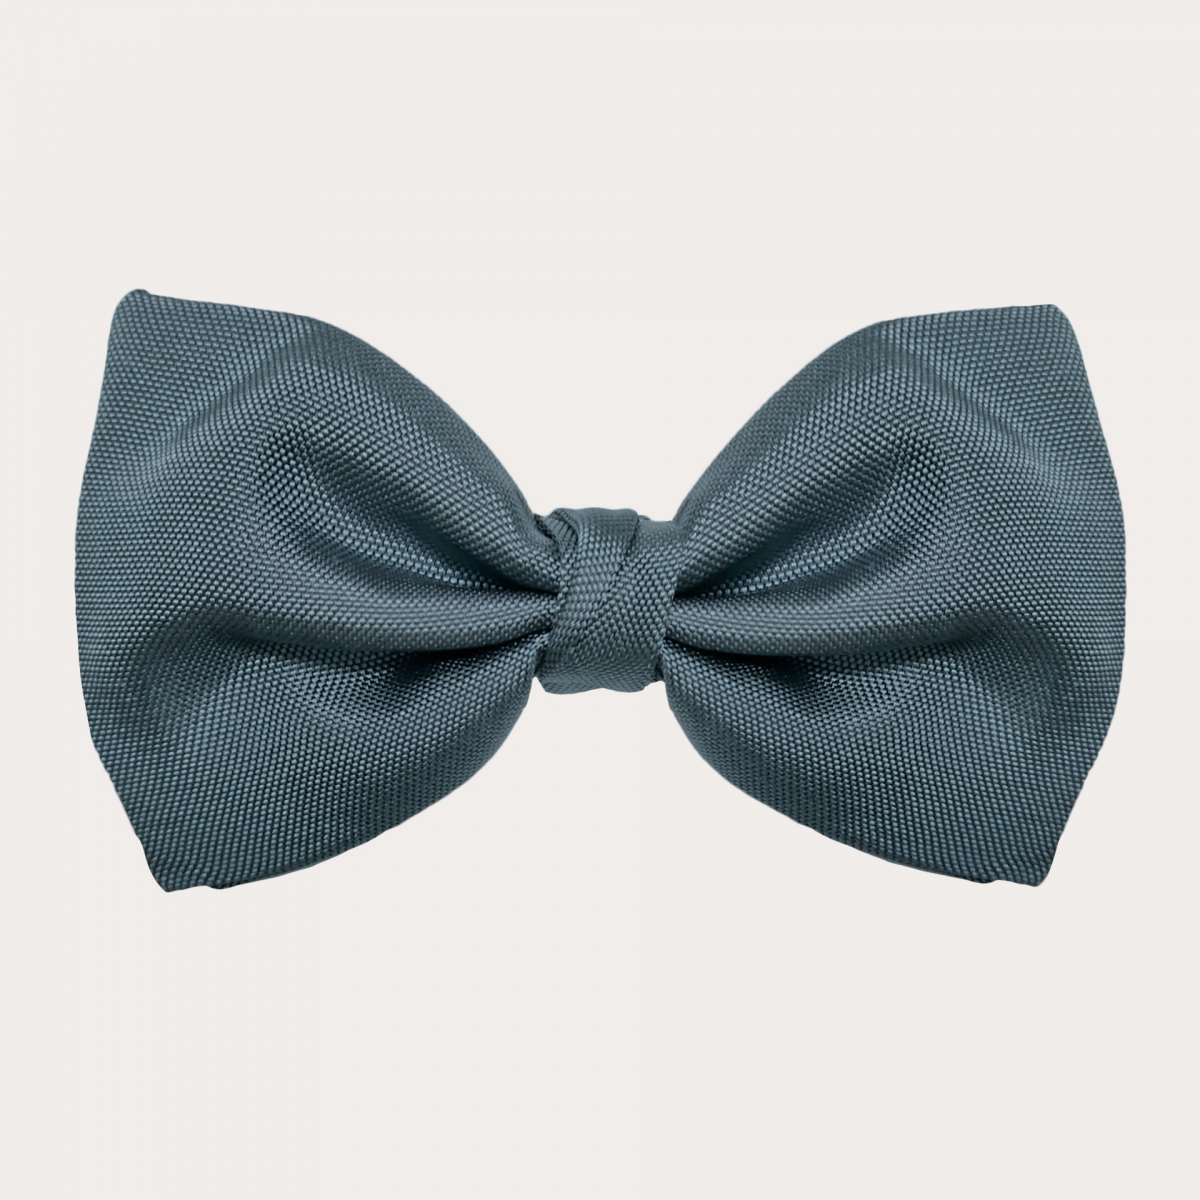 BRUCLE Elegant set of suspenders and bow tie in dusty blue color